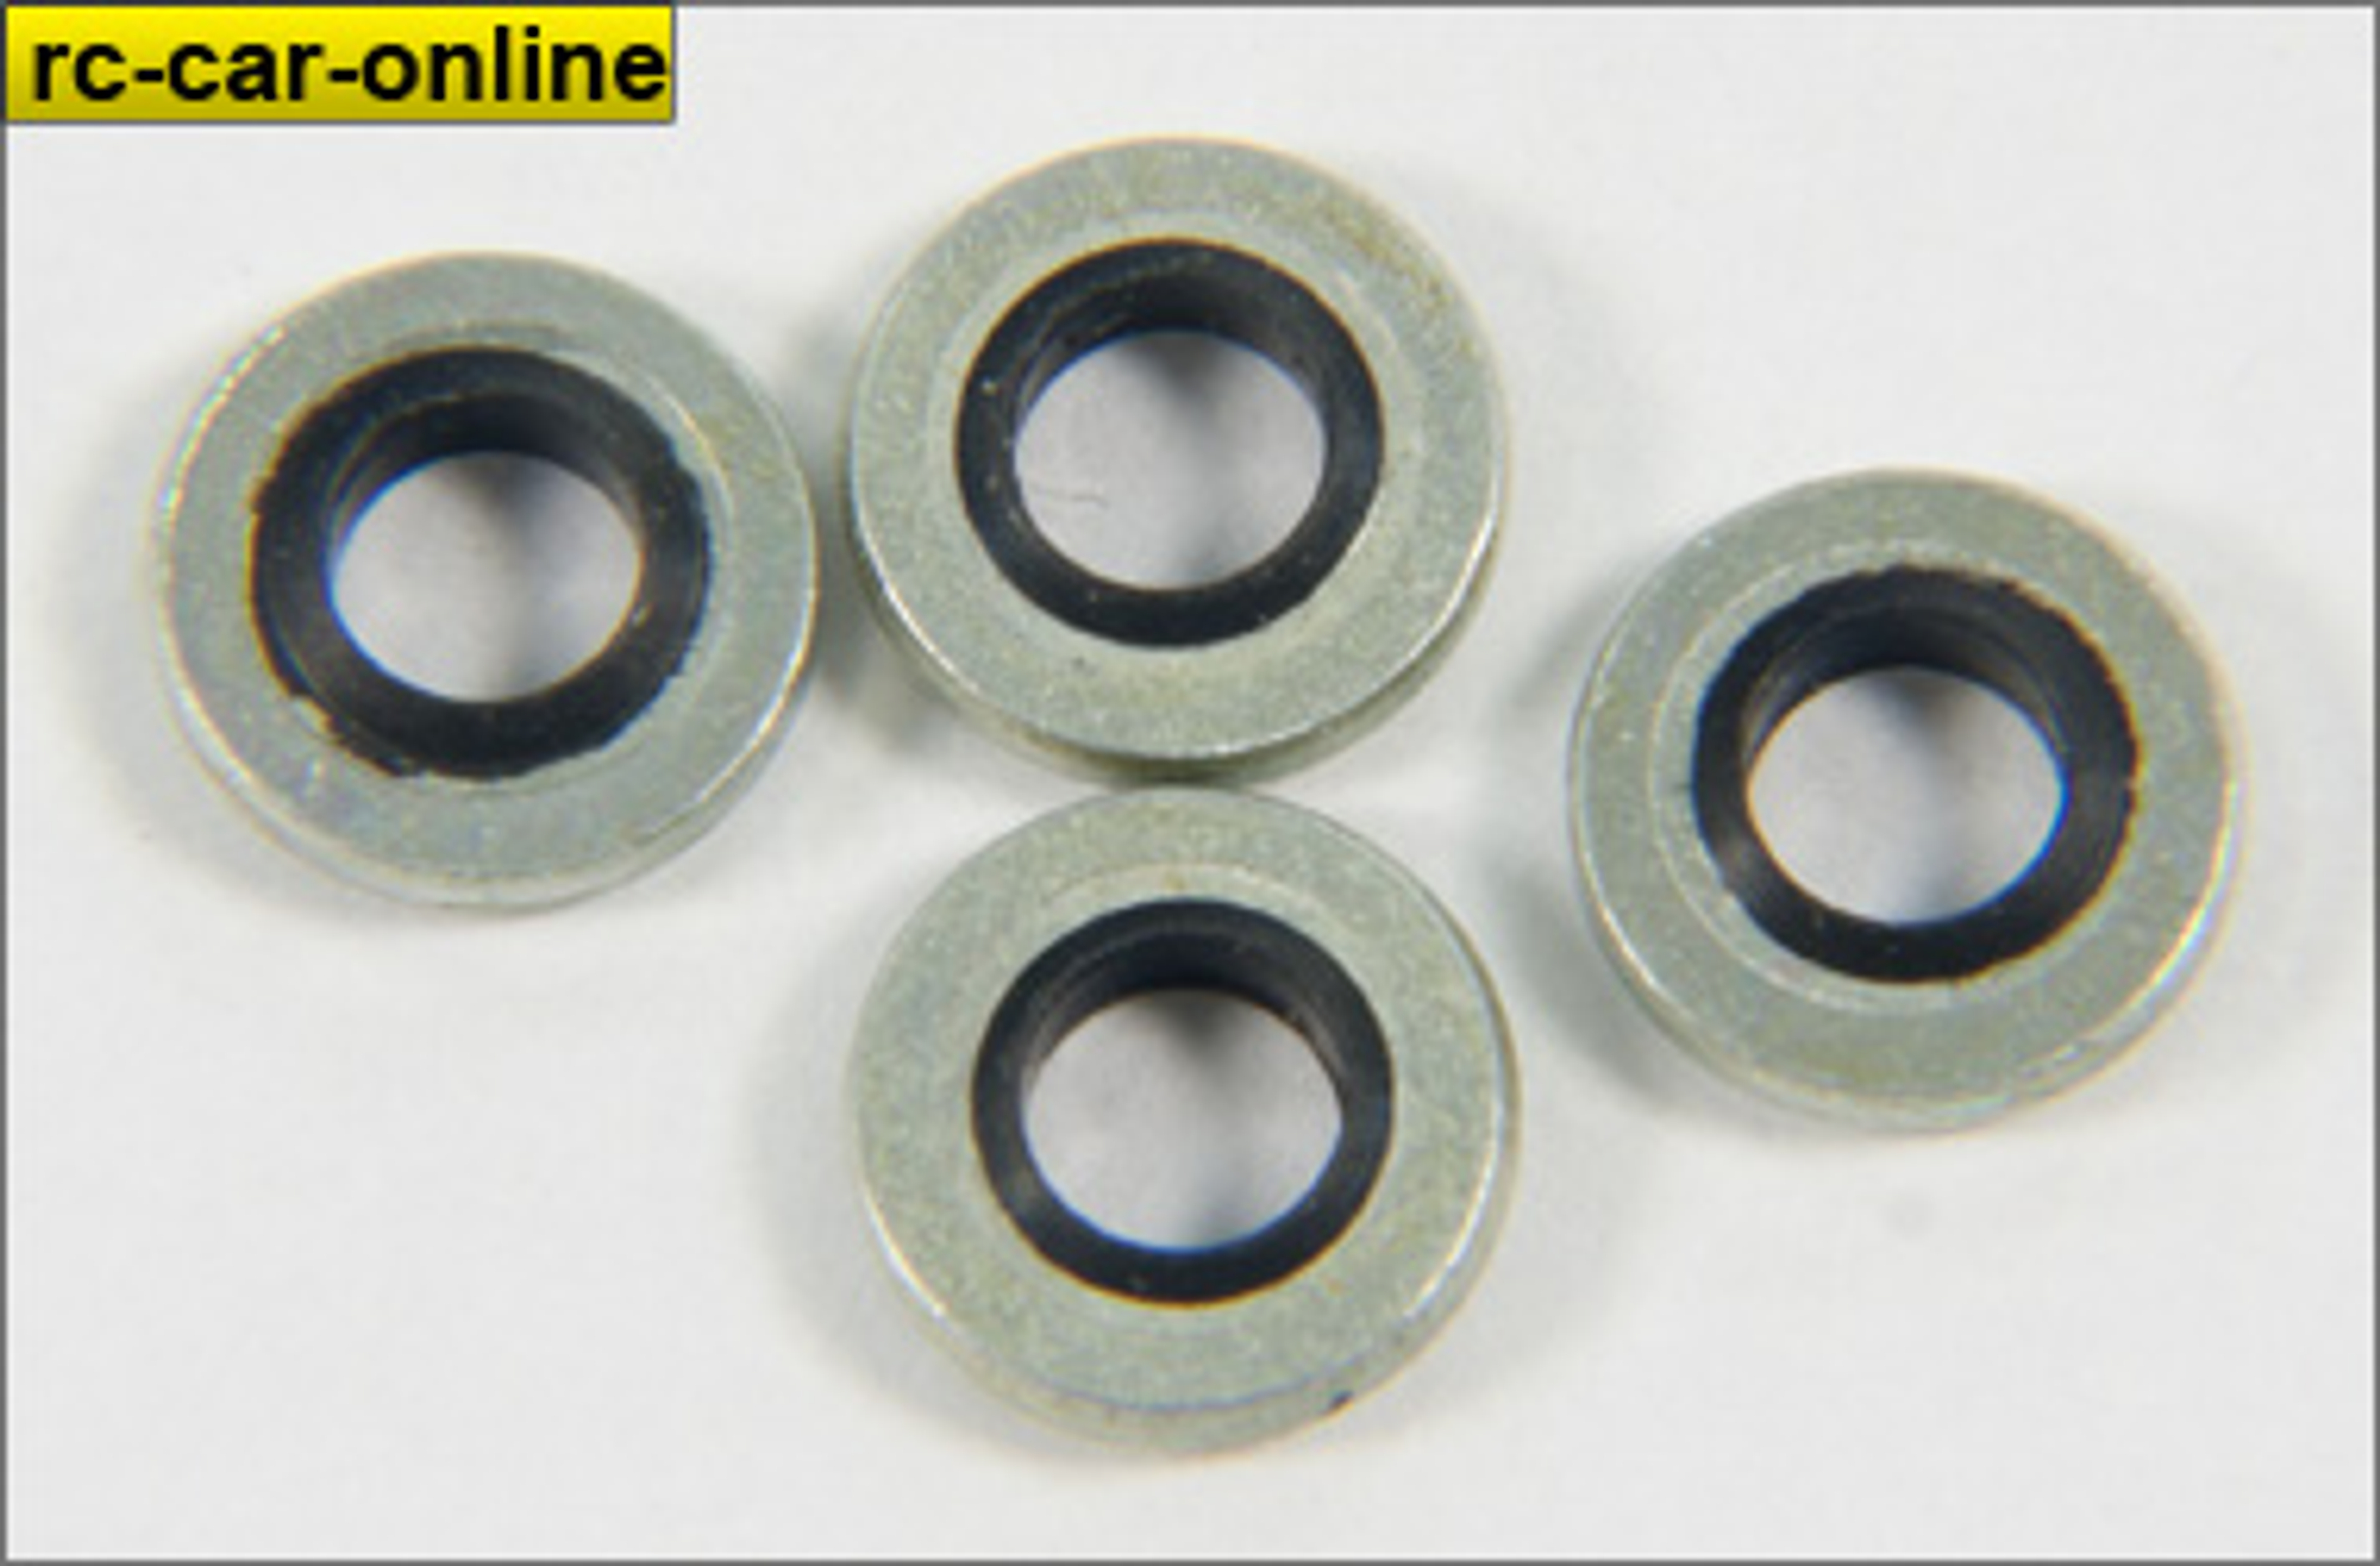 y0309/03 Gasket small for bleeder valves, 4 pcs.